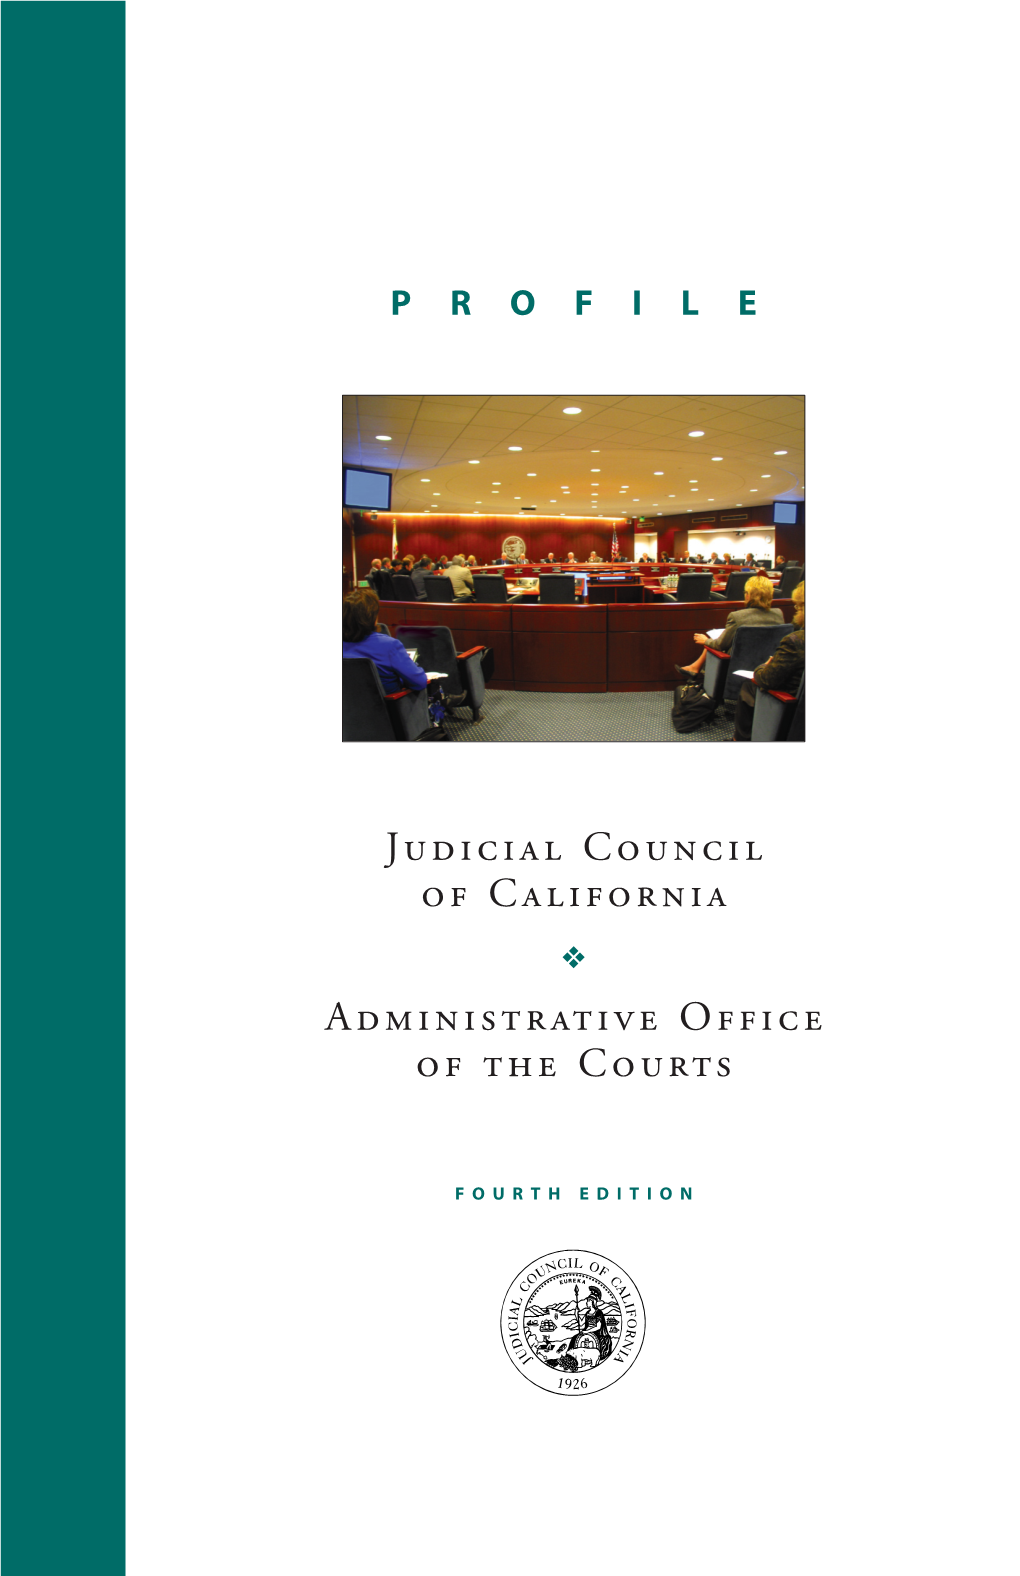 Judicial Council of California Administrative Office of the Courts